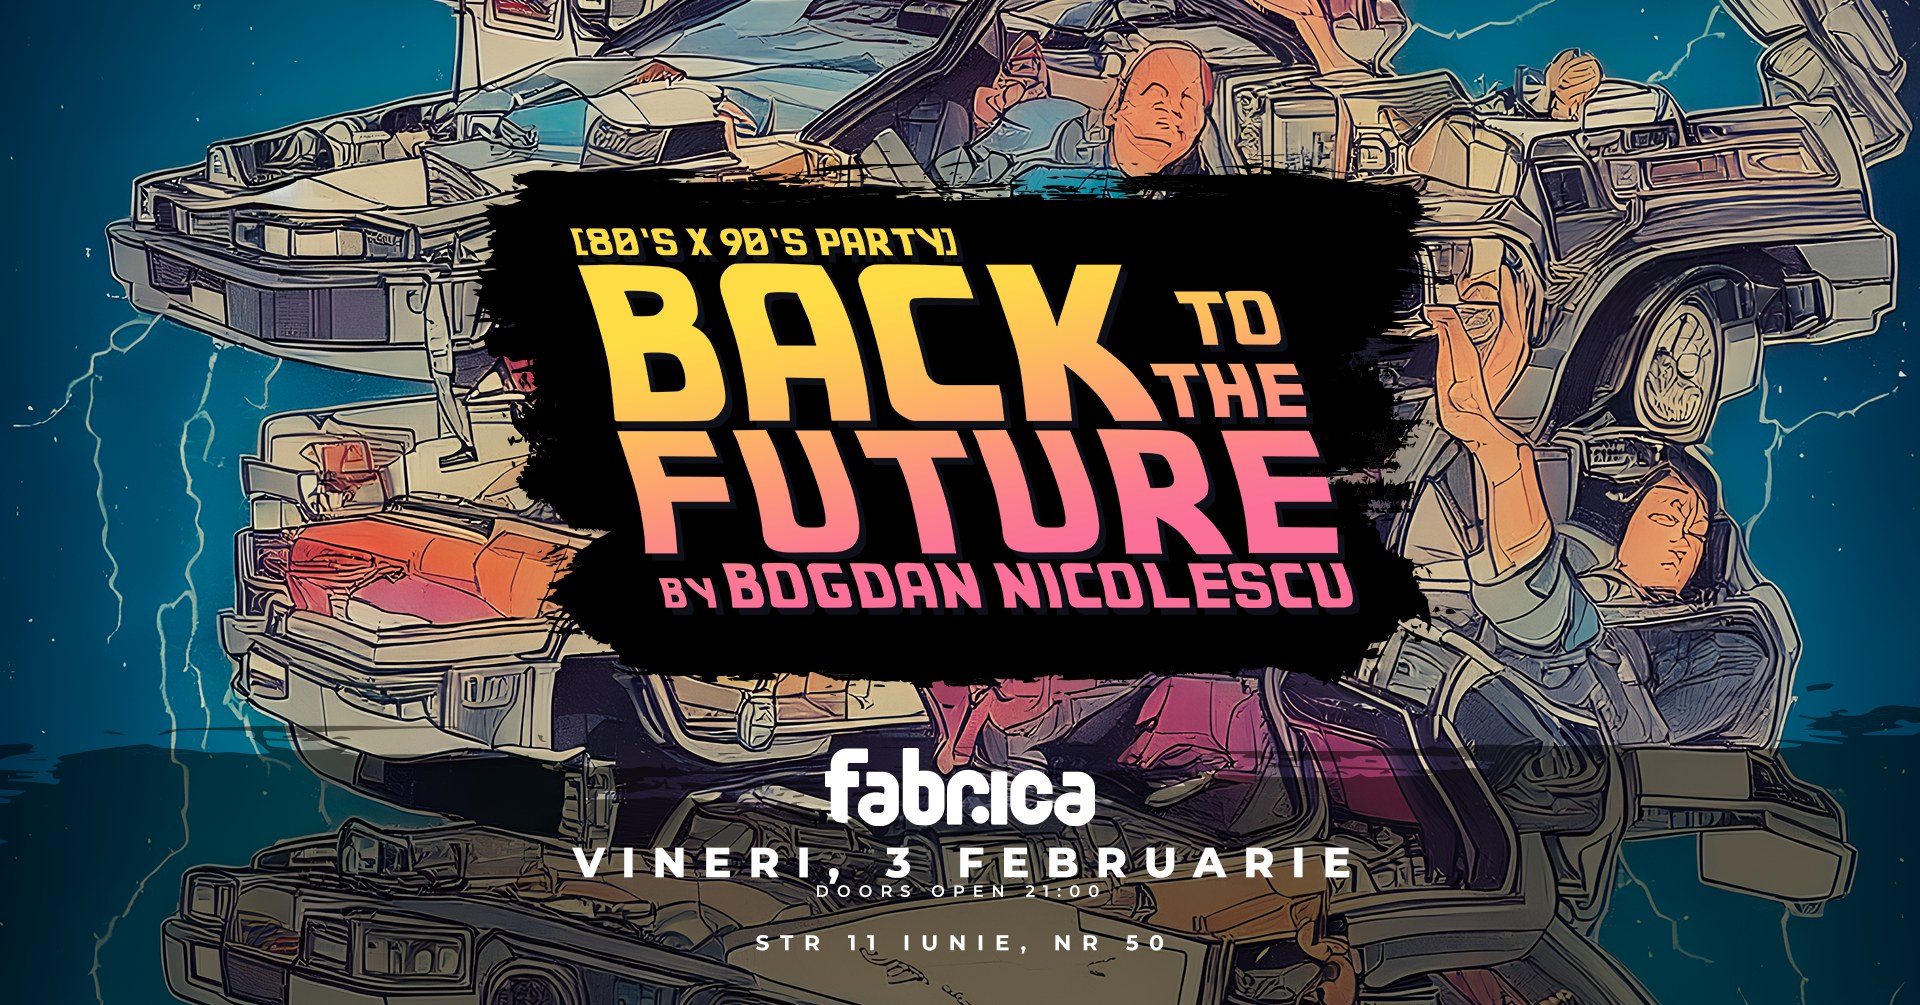 Back To The Future - 80's & 90's Party by Bogdan